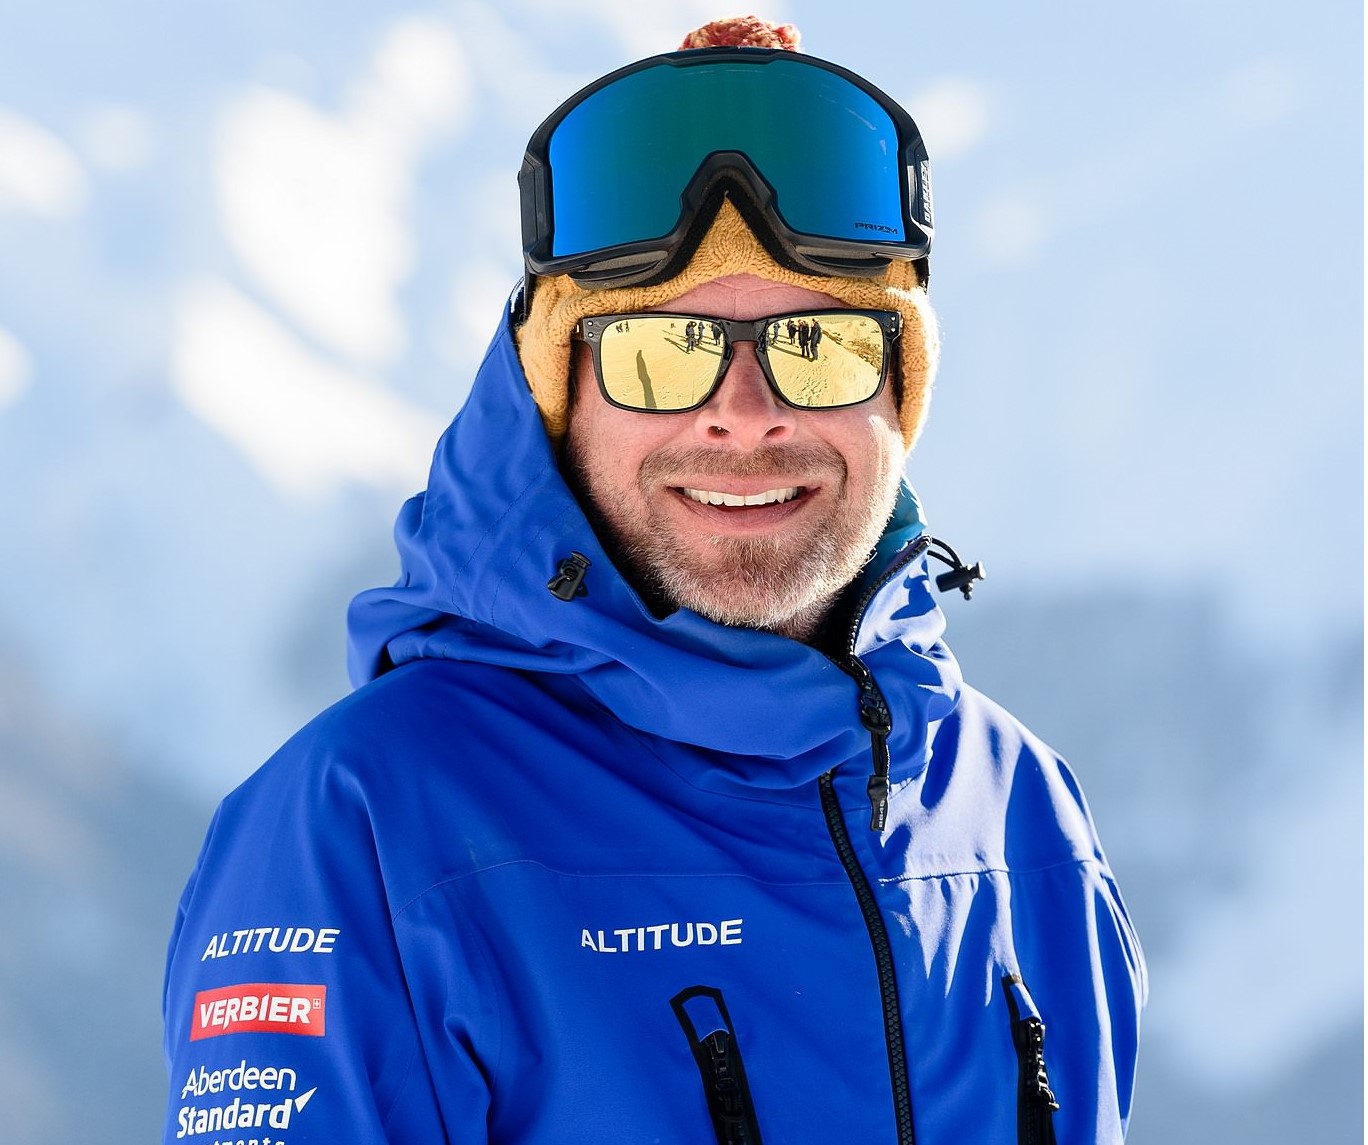 Dutch Instructor talks about working and training in Verbier